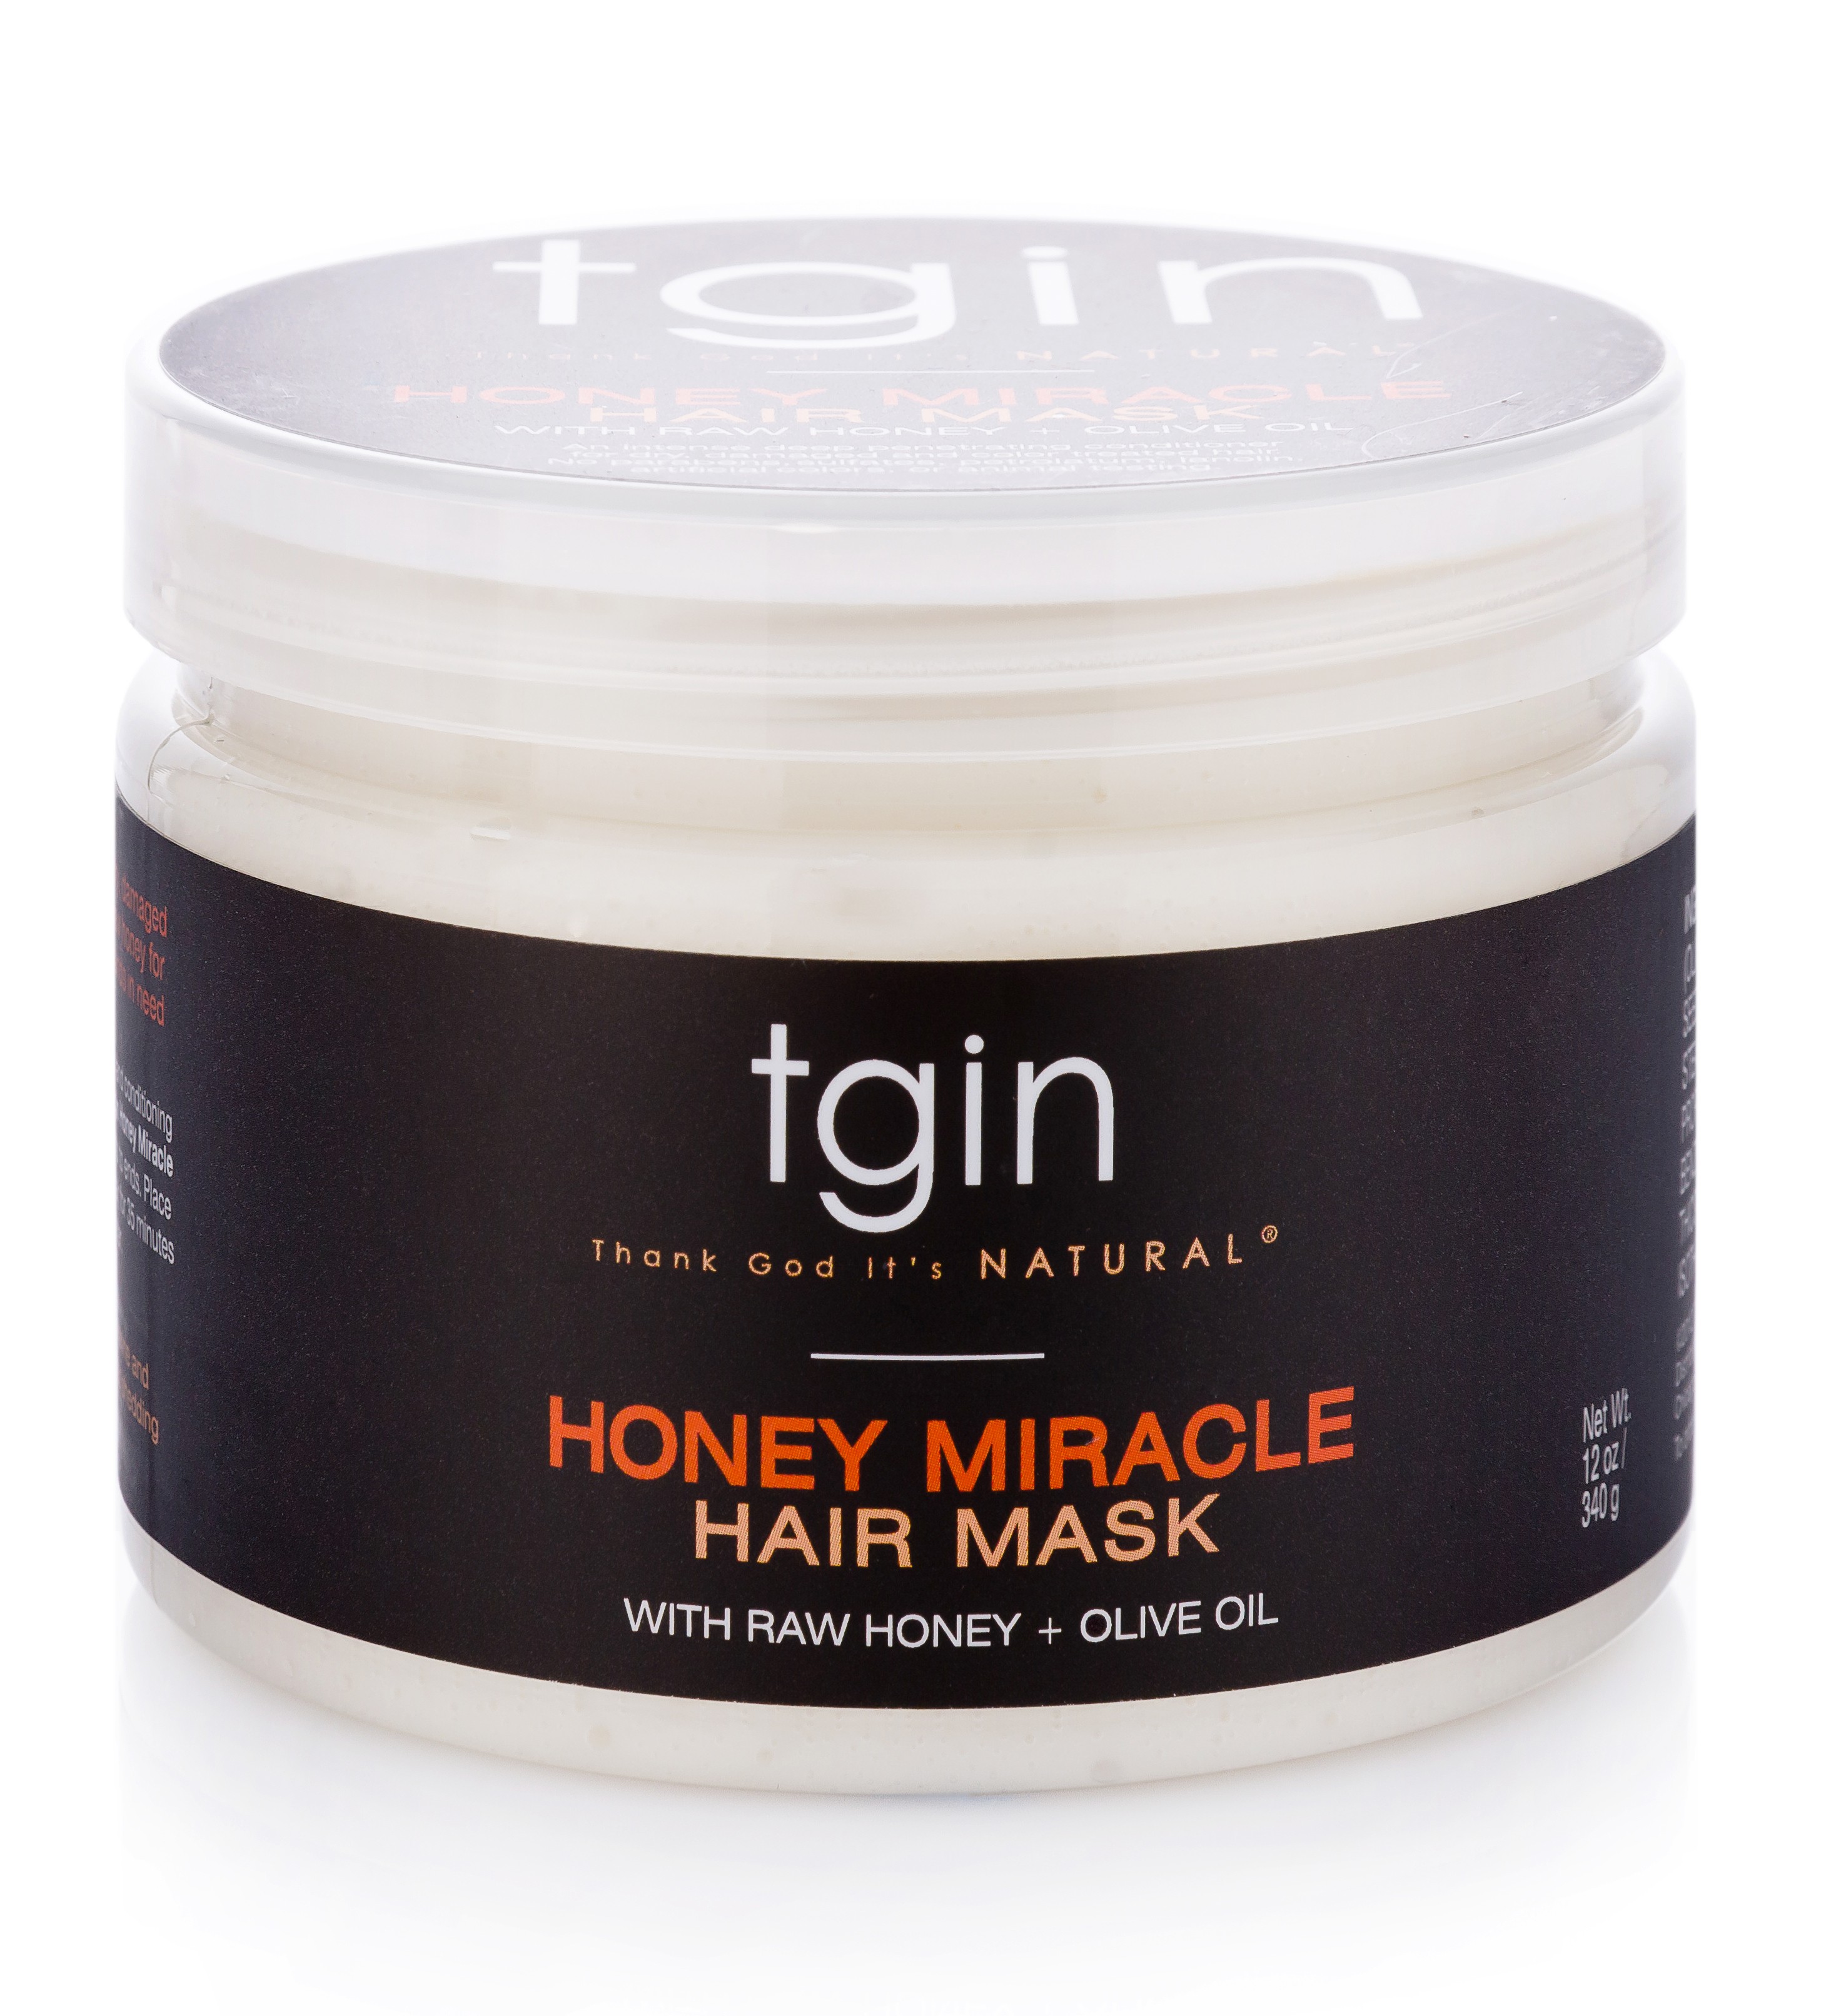 TGIN Honey Miracle Hair Mask (Masque capillaire miracle au miel)